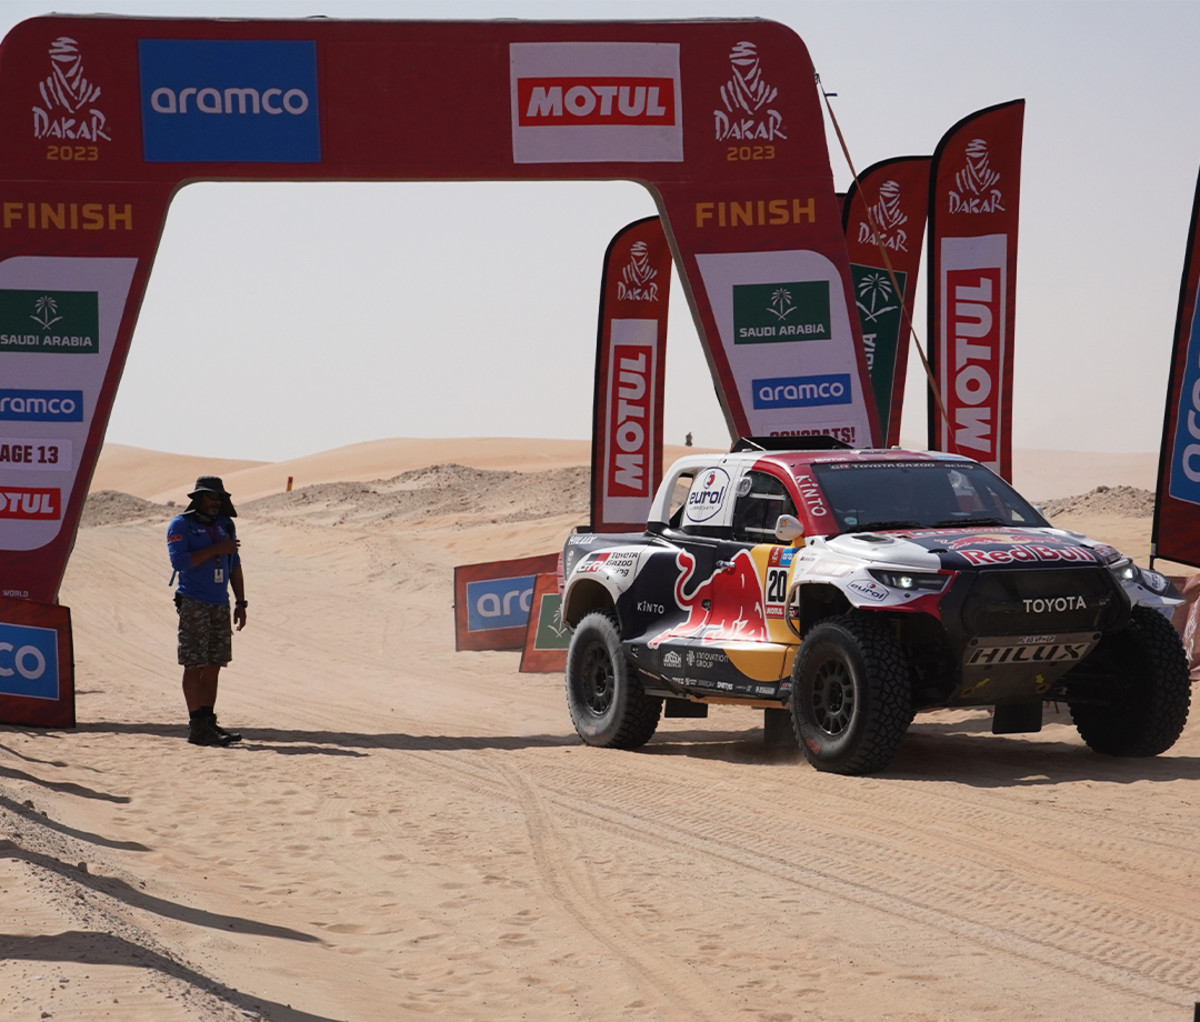 Finish line at the Dakar Rally with a man standing under an arch with a Toyota off-road truck driving through.